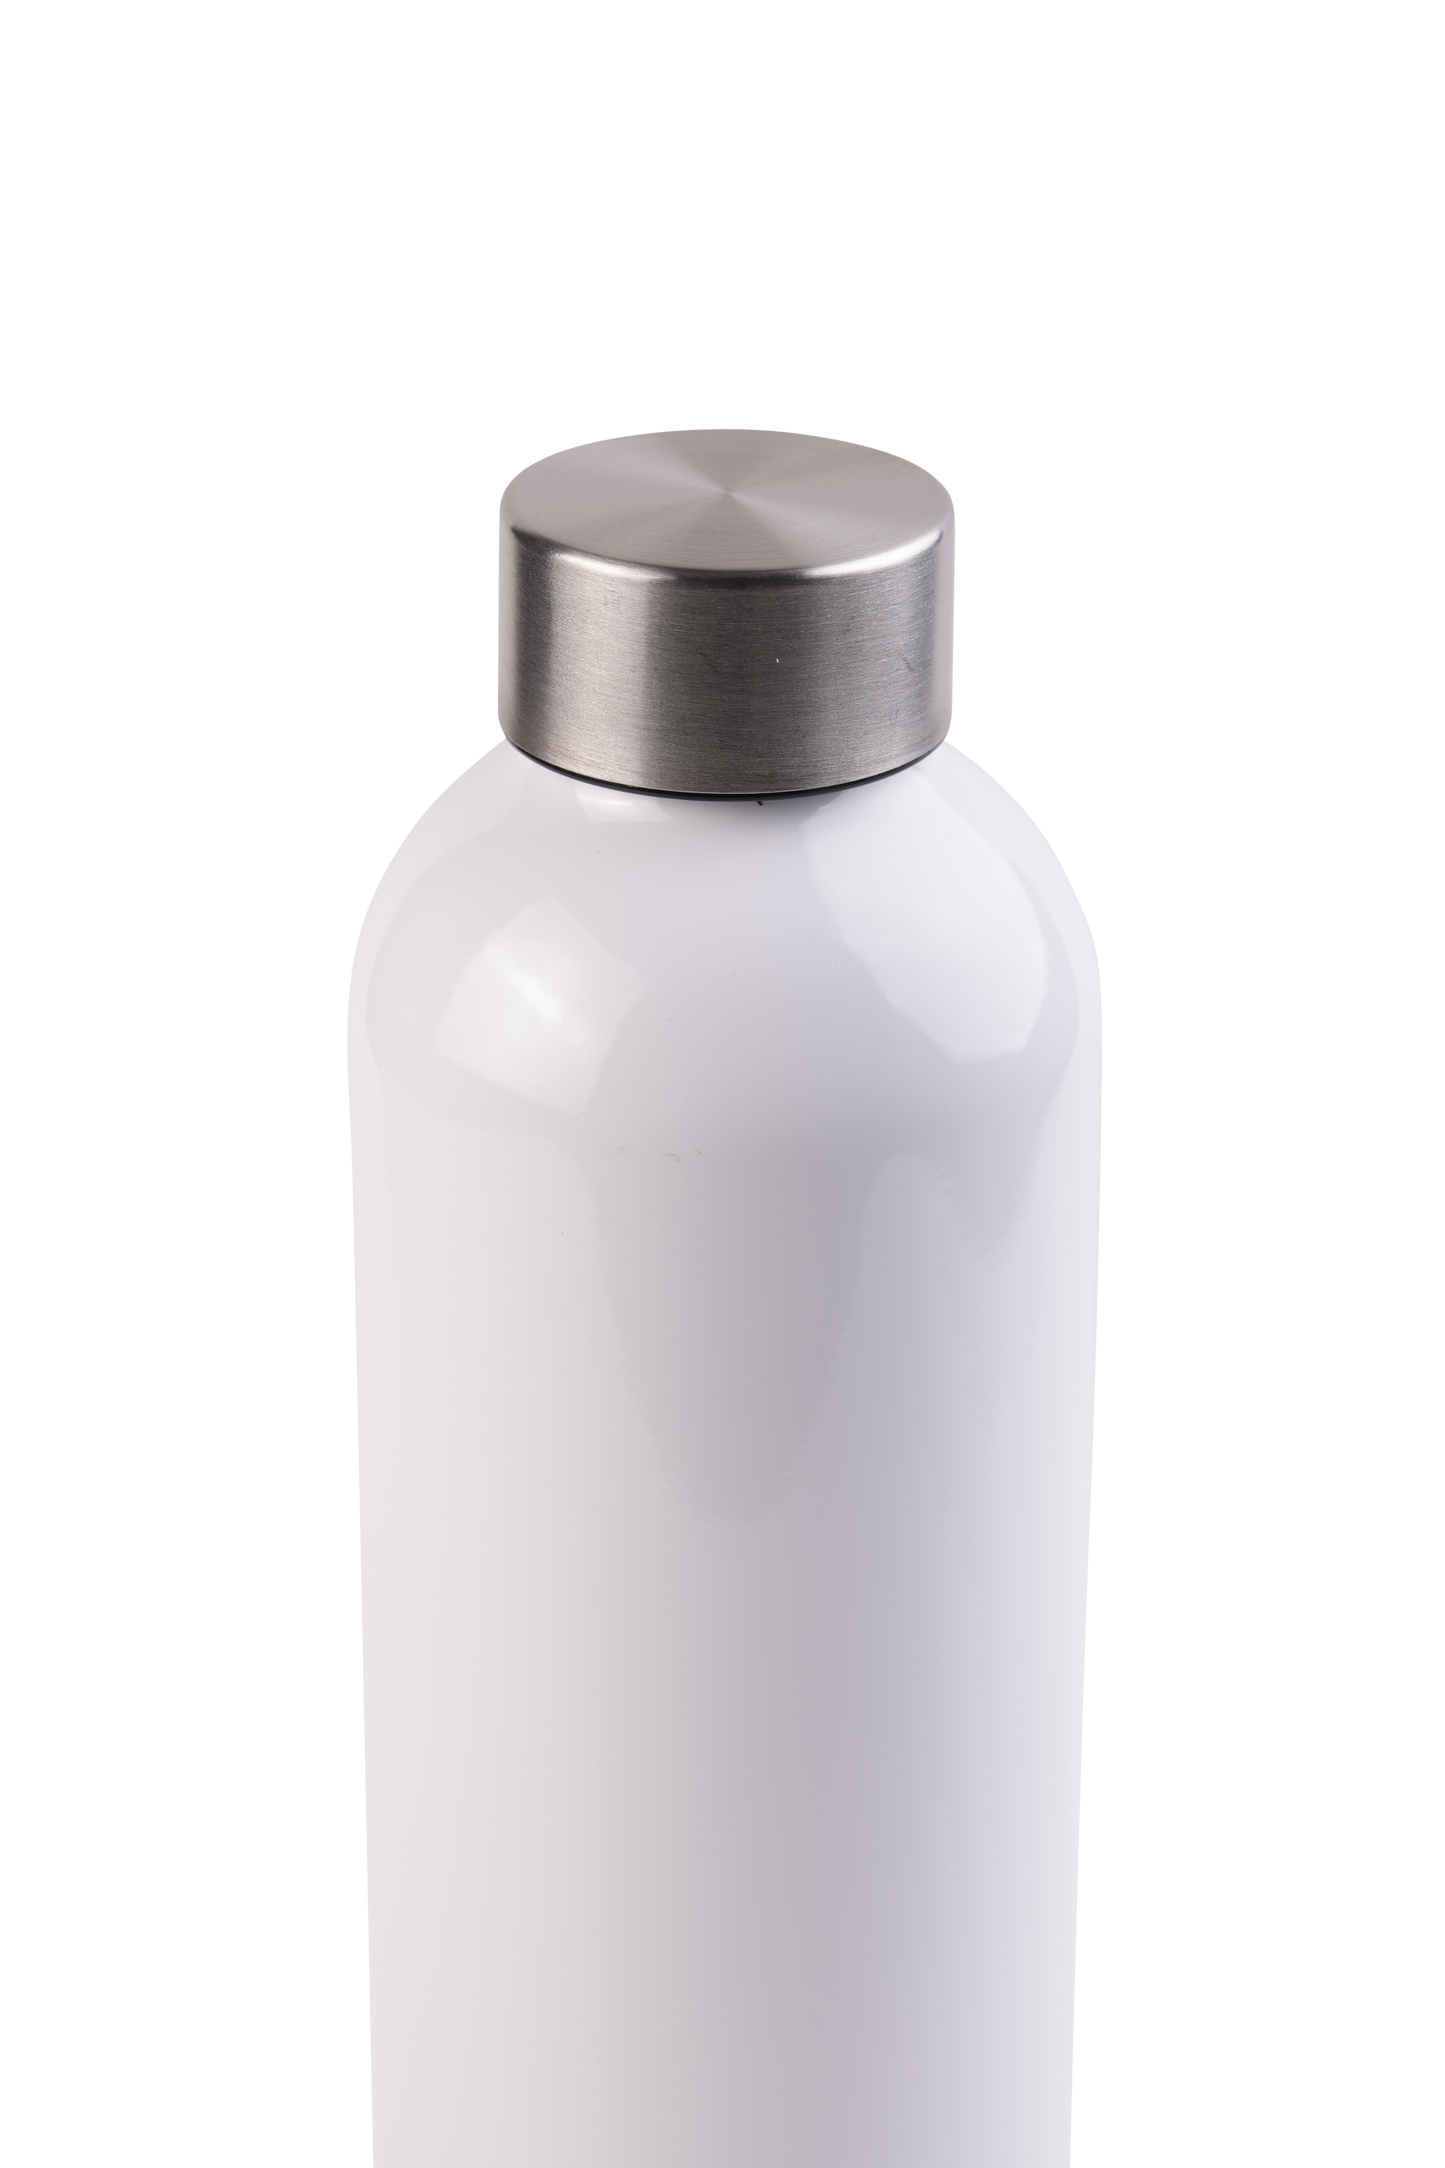 17oz (500ml)Sublimation Blank  Stainless Steel Water Bottle(unit)